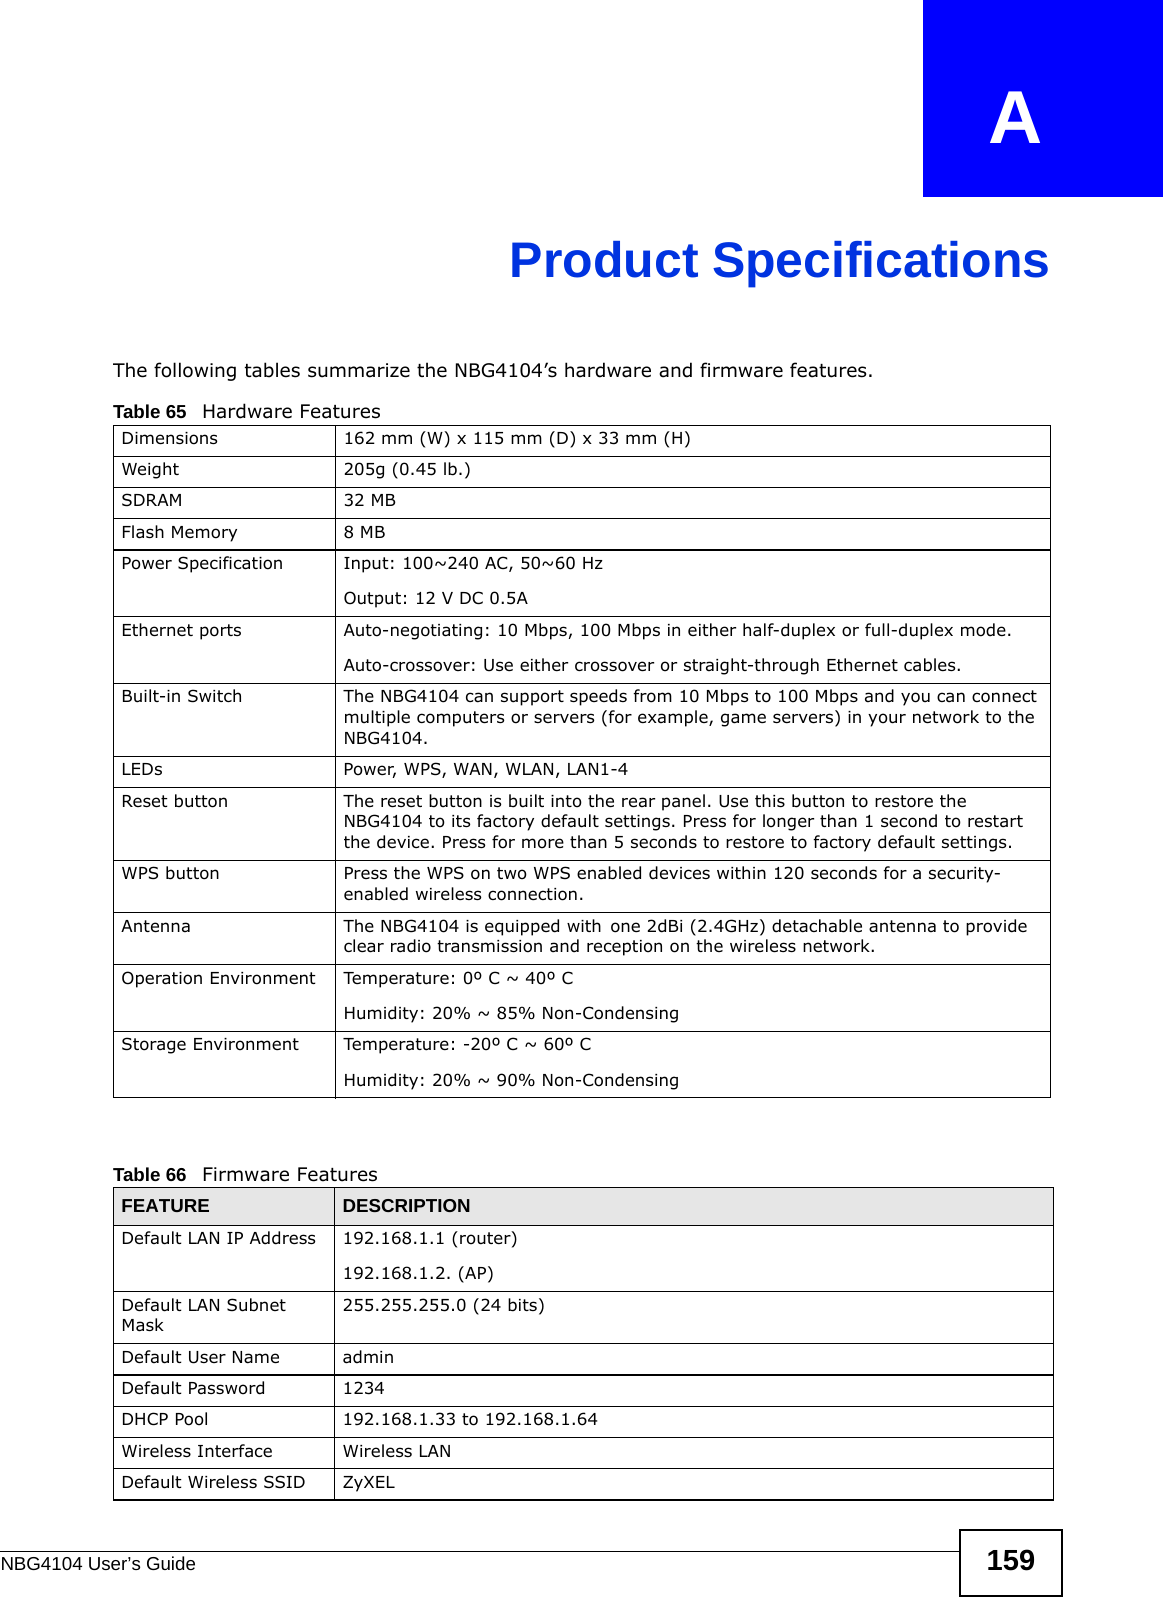 NBG4104 User’s Guide 159APPENDIX   AProduct SpecificationsThe following tables summarize the NBG4104’s hardware and firmware features.Table 65   Hardware FeaturesDimensions 162 mm (W) x 115 mm (D) x 33 mm (H)Weight 205g (0.45 lb.)SDRAM 32 MBFlash Memory 8 MBPower Specification Input: 100~240 AC, 50~60 HzOutput: 12 V DC 0.5AEthernet ports Auto-negotiating: 10 Mbps, 100 Mbps in either half-duplex or full-duplex mode.Auto-crossover: Use either crossover or straight-through Ethernet cables.Built-in Switch The NBG4104 can support speeds from 10 Mbps to 100 Mbps and you can connect multiple computers or servers (for example, game servers) in your network to the NBG4104.LEDs Power, WPS, WAN, WLAN, LAN1-4Reset button The reset button is built into the rear panel. Use this button to restore the NBG4104 to its factory default settings. Press for longer than 1 second to restart the device. Press for more than 5 seconds to restore to factory default settings.WPS button Press the WPS on two WPS enabled devices within 120 seconds for a security-enabled wireless connection.Antenna The NBG4104 is equipped with one 2dBi (2.4GHz) detachable antenna to provide clear radio transmission and reception on the wireless network. Operation Environment Temperature: 0º C ~ 40º CHumidity: 20% ~ 85% Non-CondensingStorage Environment Temperature: -20º C ~ 60º CHumidity: 20% ~ 90% Non-CondensingTable 66   Firmware FeaturesFEATURE DESCRIPTIONDefault LAN IP Address 192.168.1.1 (router)192.168.1.2. (AP)Default LAN Subnet Mask255.255.255.0 (24 bits)Default User Name adminDefault Password 1234DHCP Pool 192.168.1.33 to 192.168.1.64 Wireless Interface Wireless LANDefault Wireless SSID ZyXEL